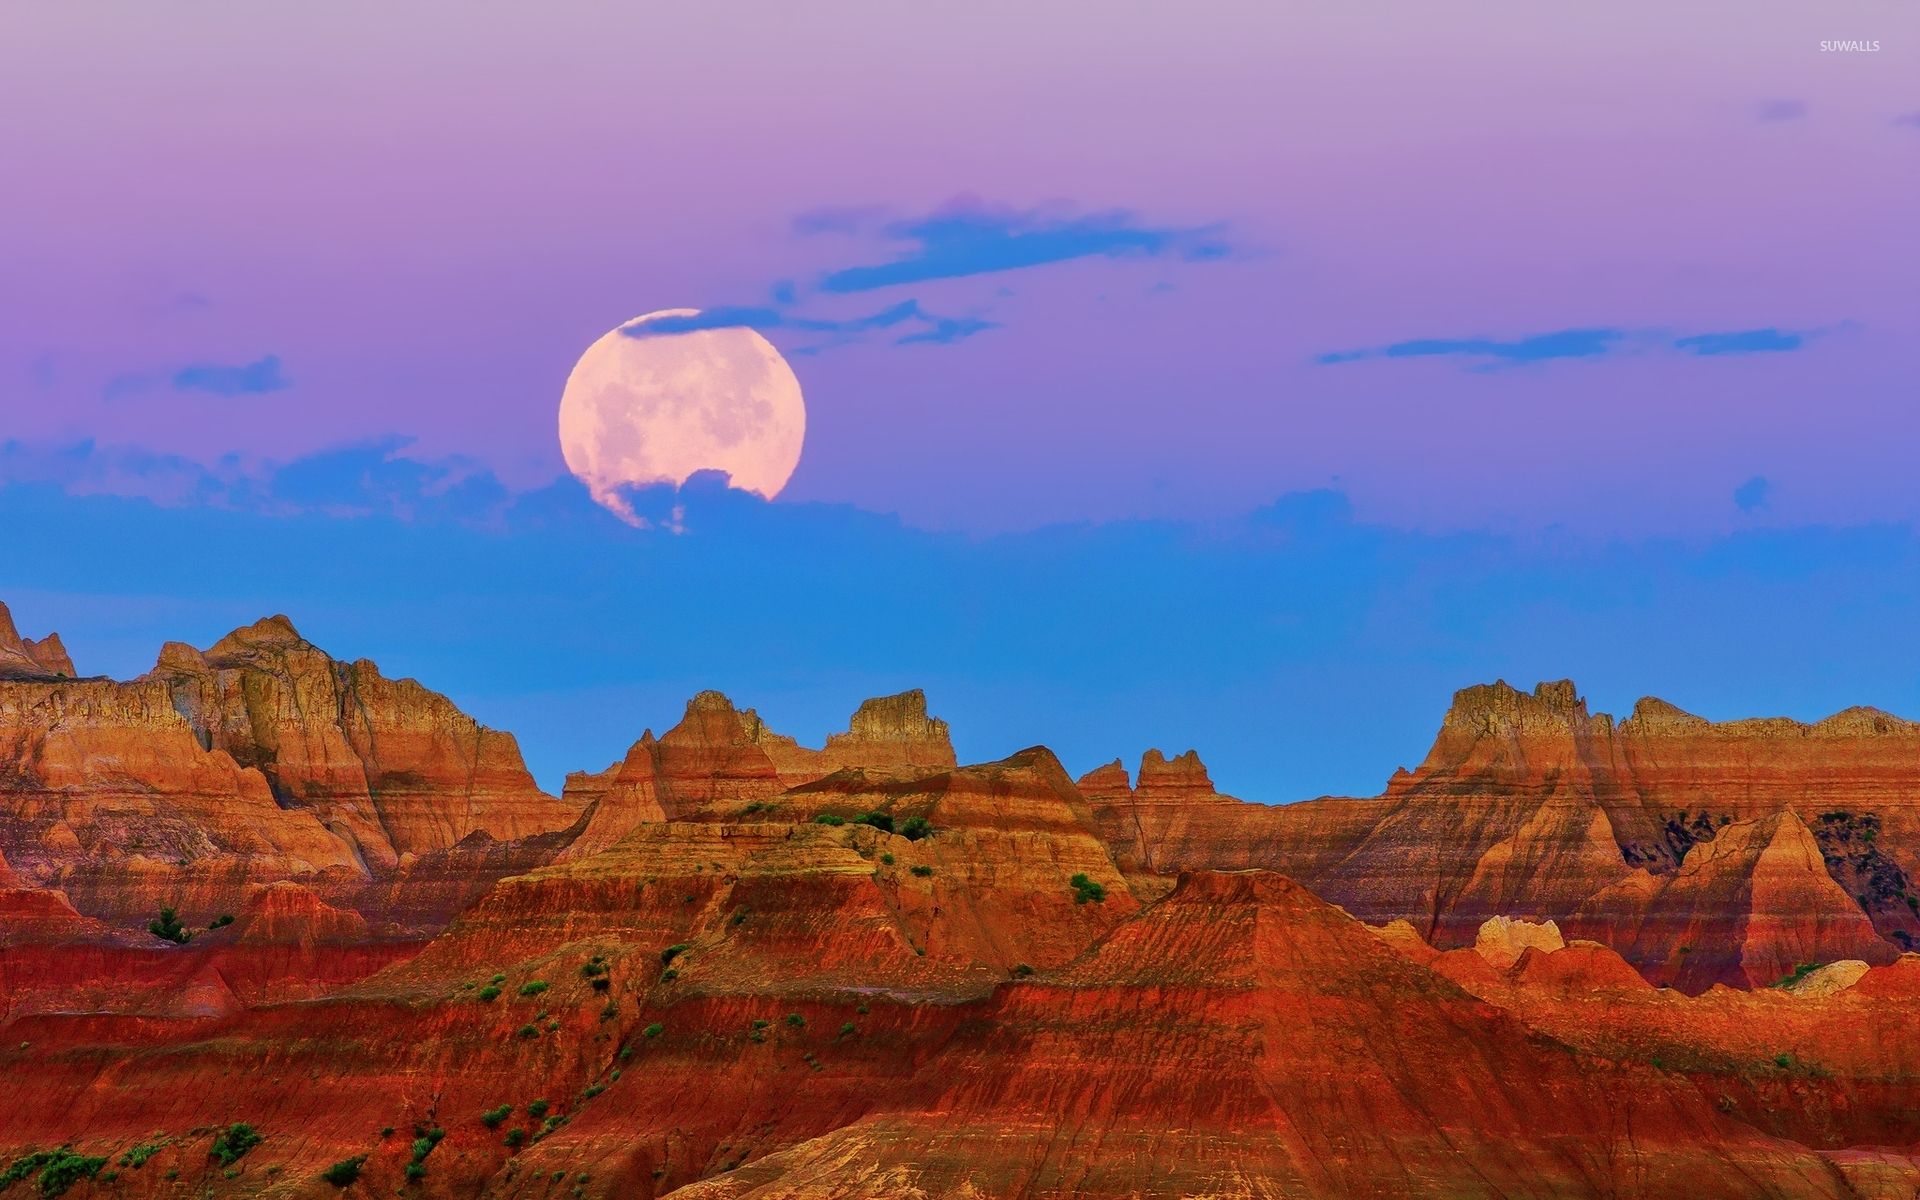 Full moon in the purple sky above the rusty canyon wallpaper wallpaper